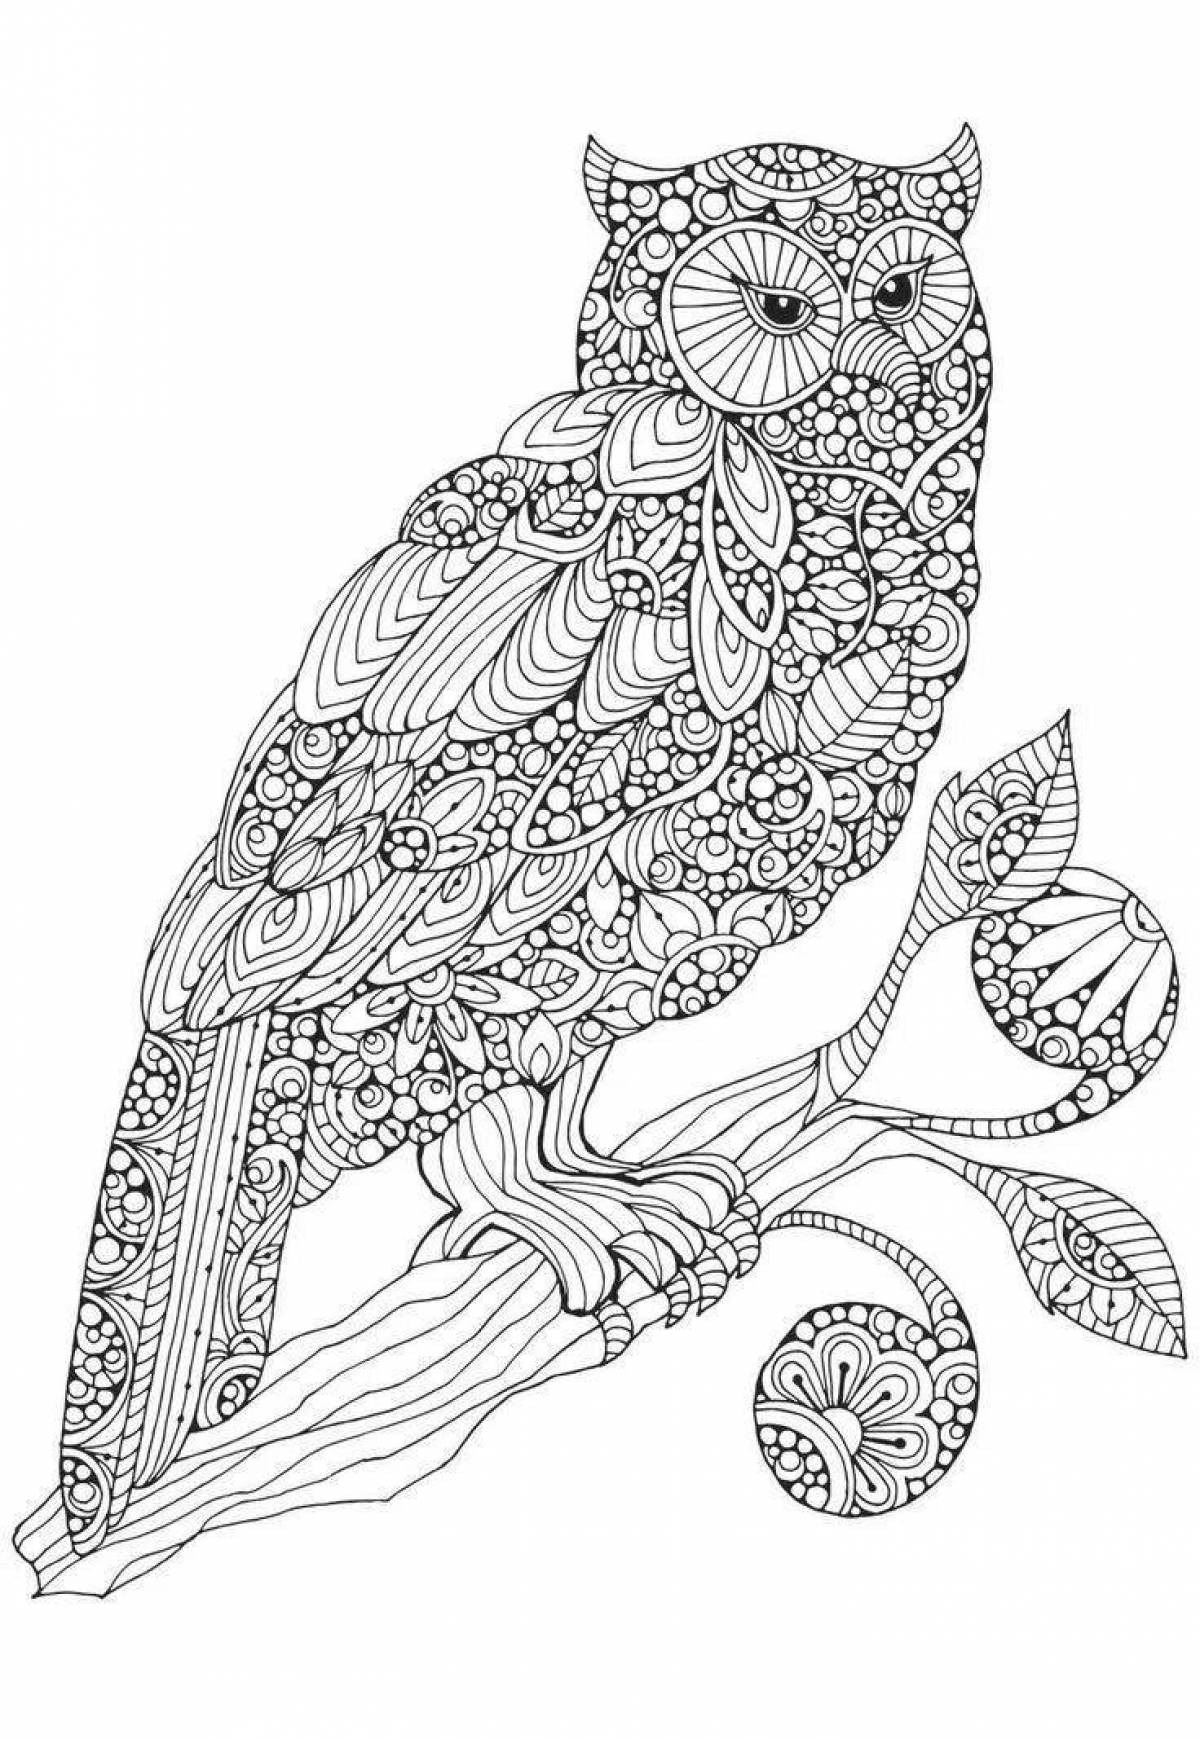 Creative animal coloring for girls